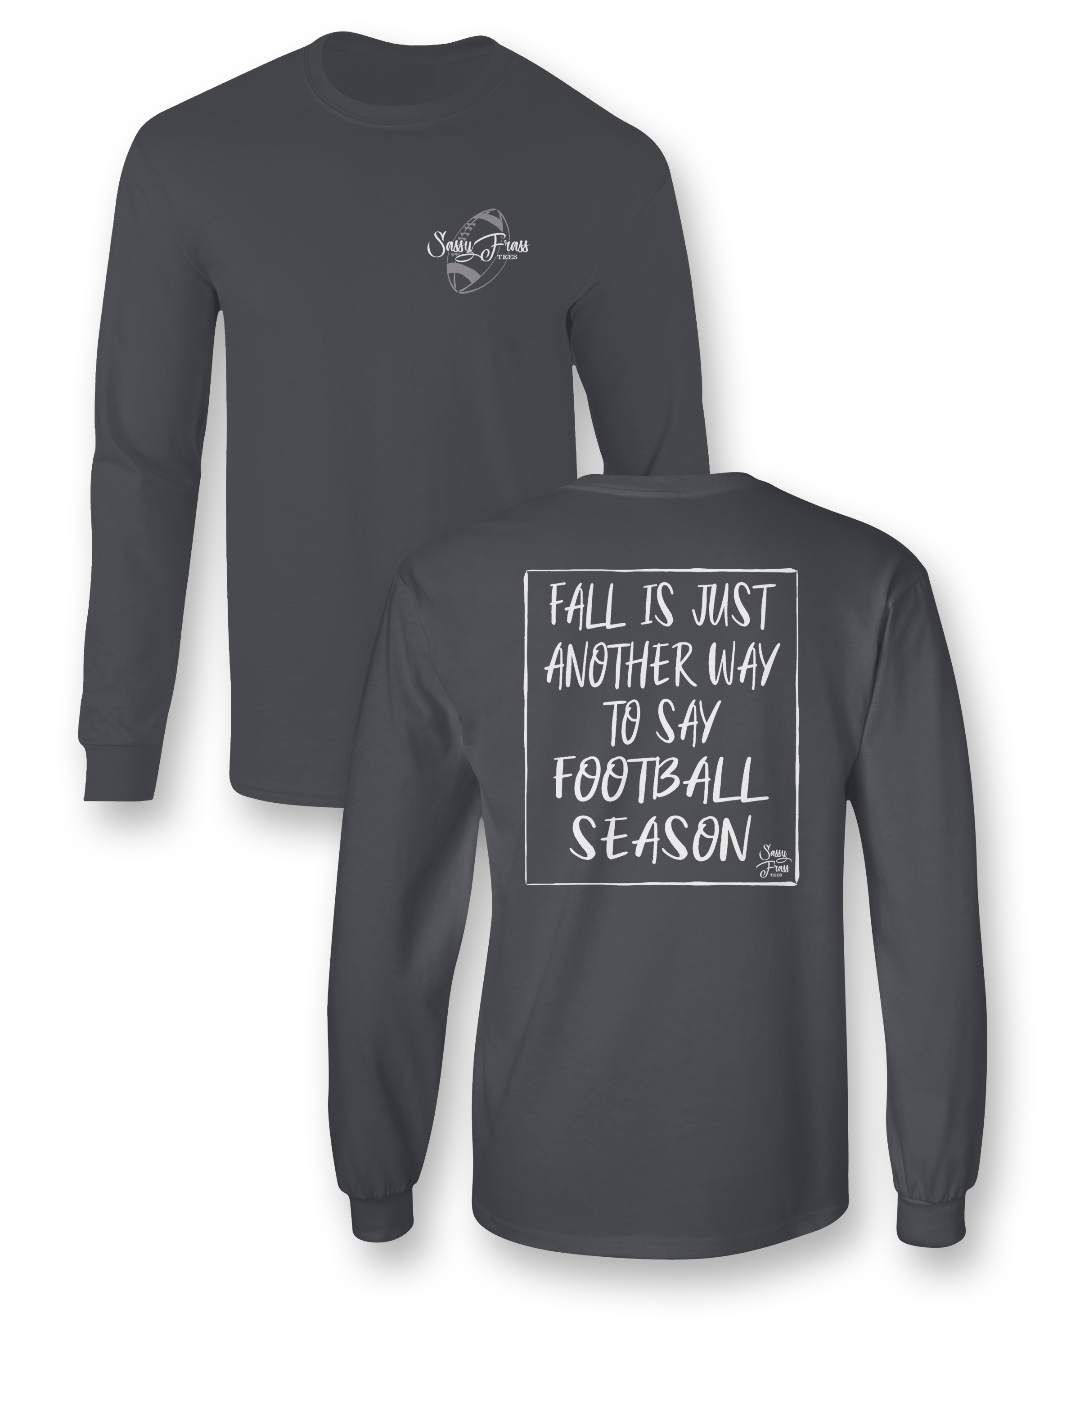 Sassy Frass Fall is Just Another Way to Say Football Season Long Sleeves Bright Girlie T Shirt